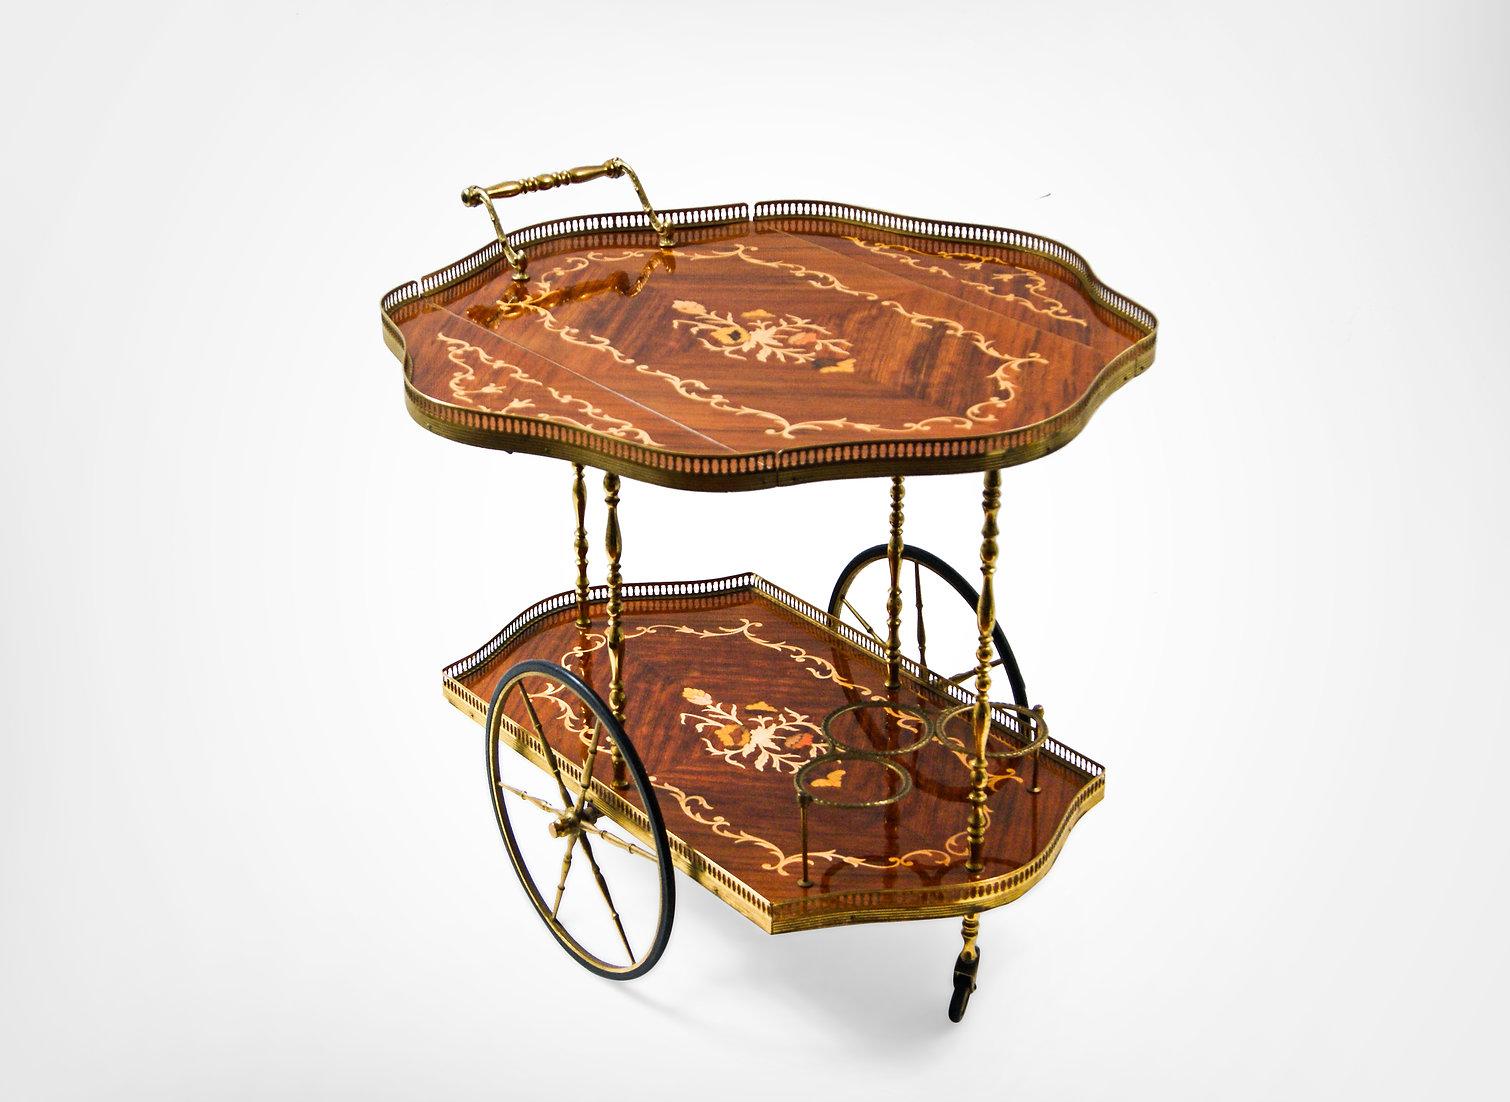 Superb Hollywood regency Italian design inlaid marquetry bar cart.
In beautiful Olivewood..
Two tiered trolley with the top section holding 2 demi-lune drop leaf extensions. 
Fine olive wood marquetry to the top tray with a central floral design